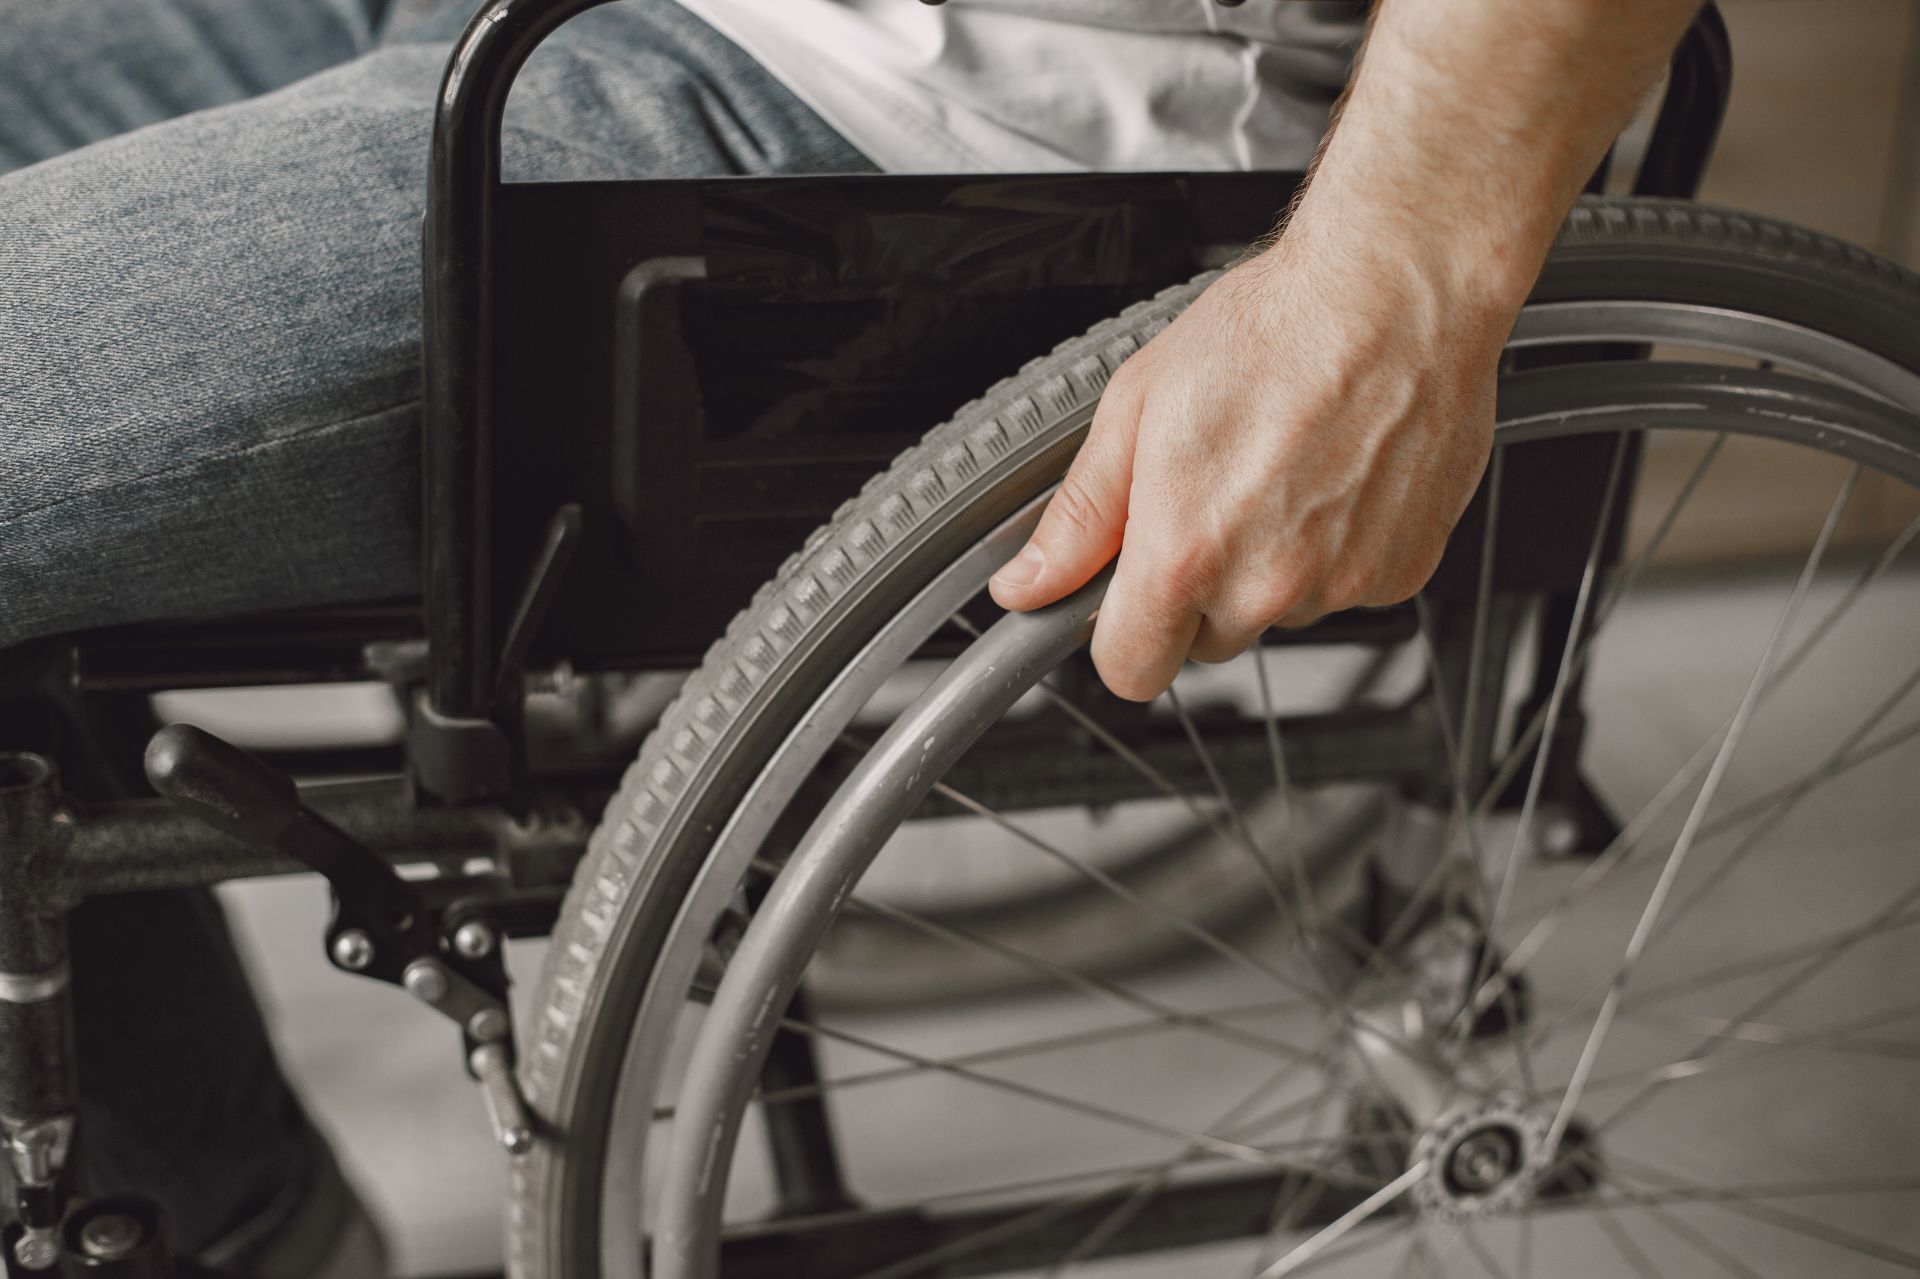 How a Long-Term Disability Lawyer Can Help with the Claim Process